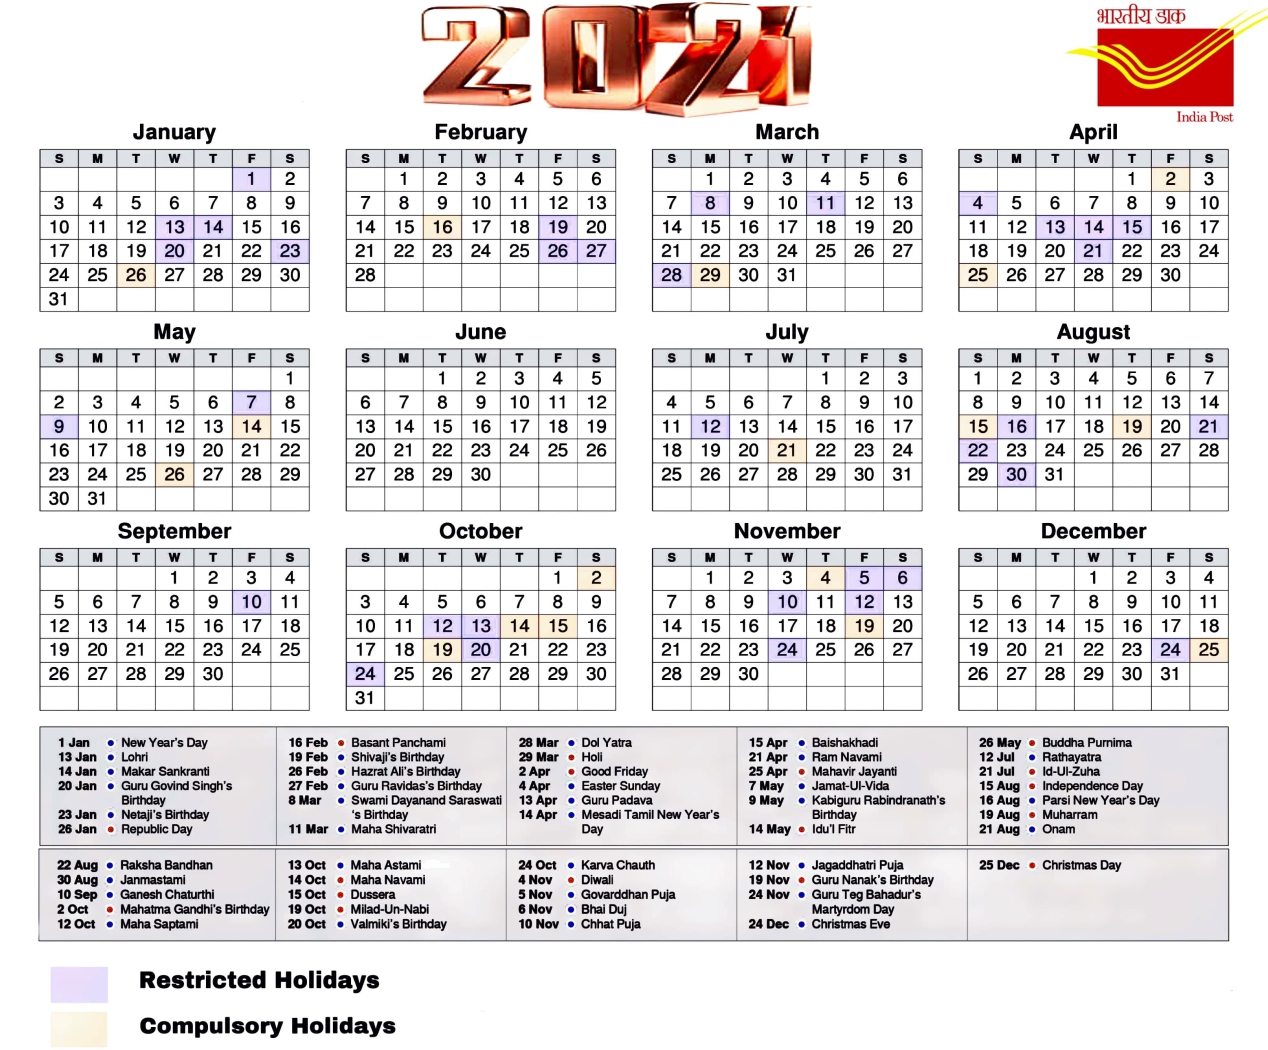 Postal Calendar 2021 - Update Restricted And Compulsory Holiday | Po Tools December 2021 Calendar With Holidays India